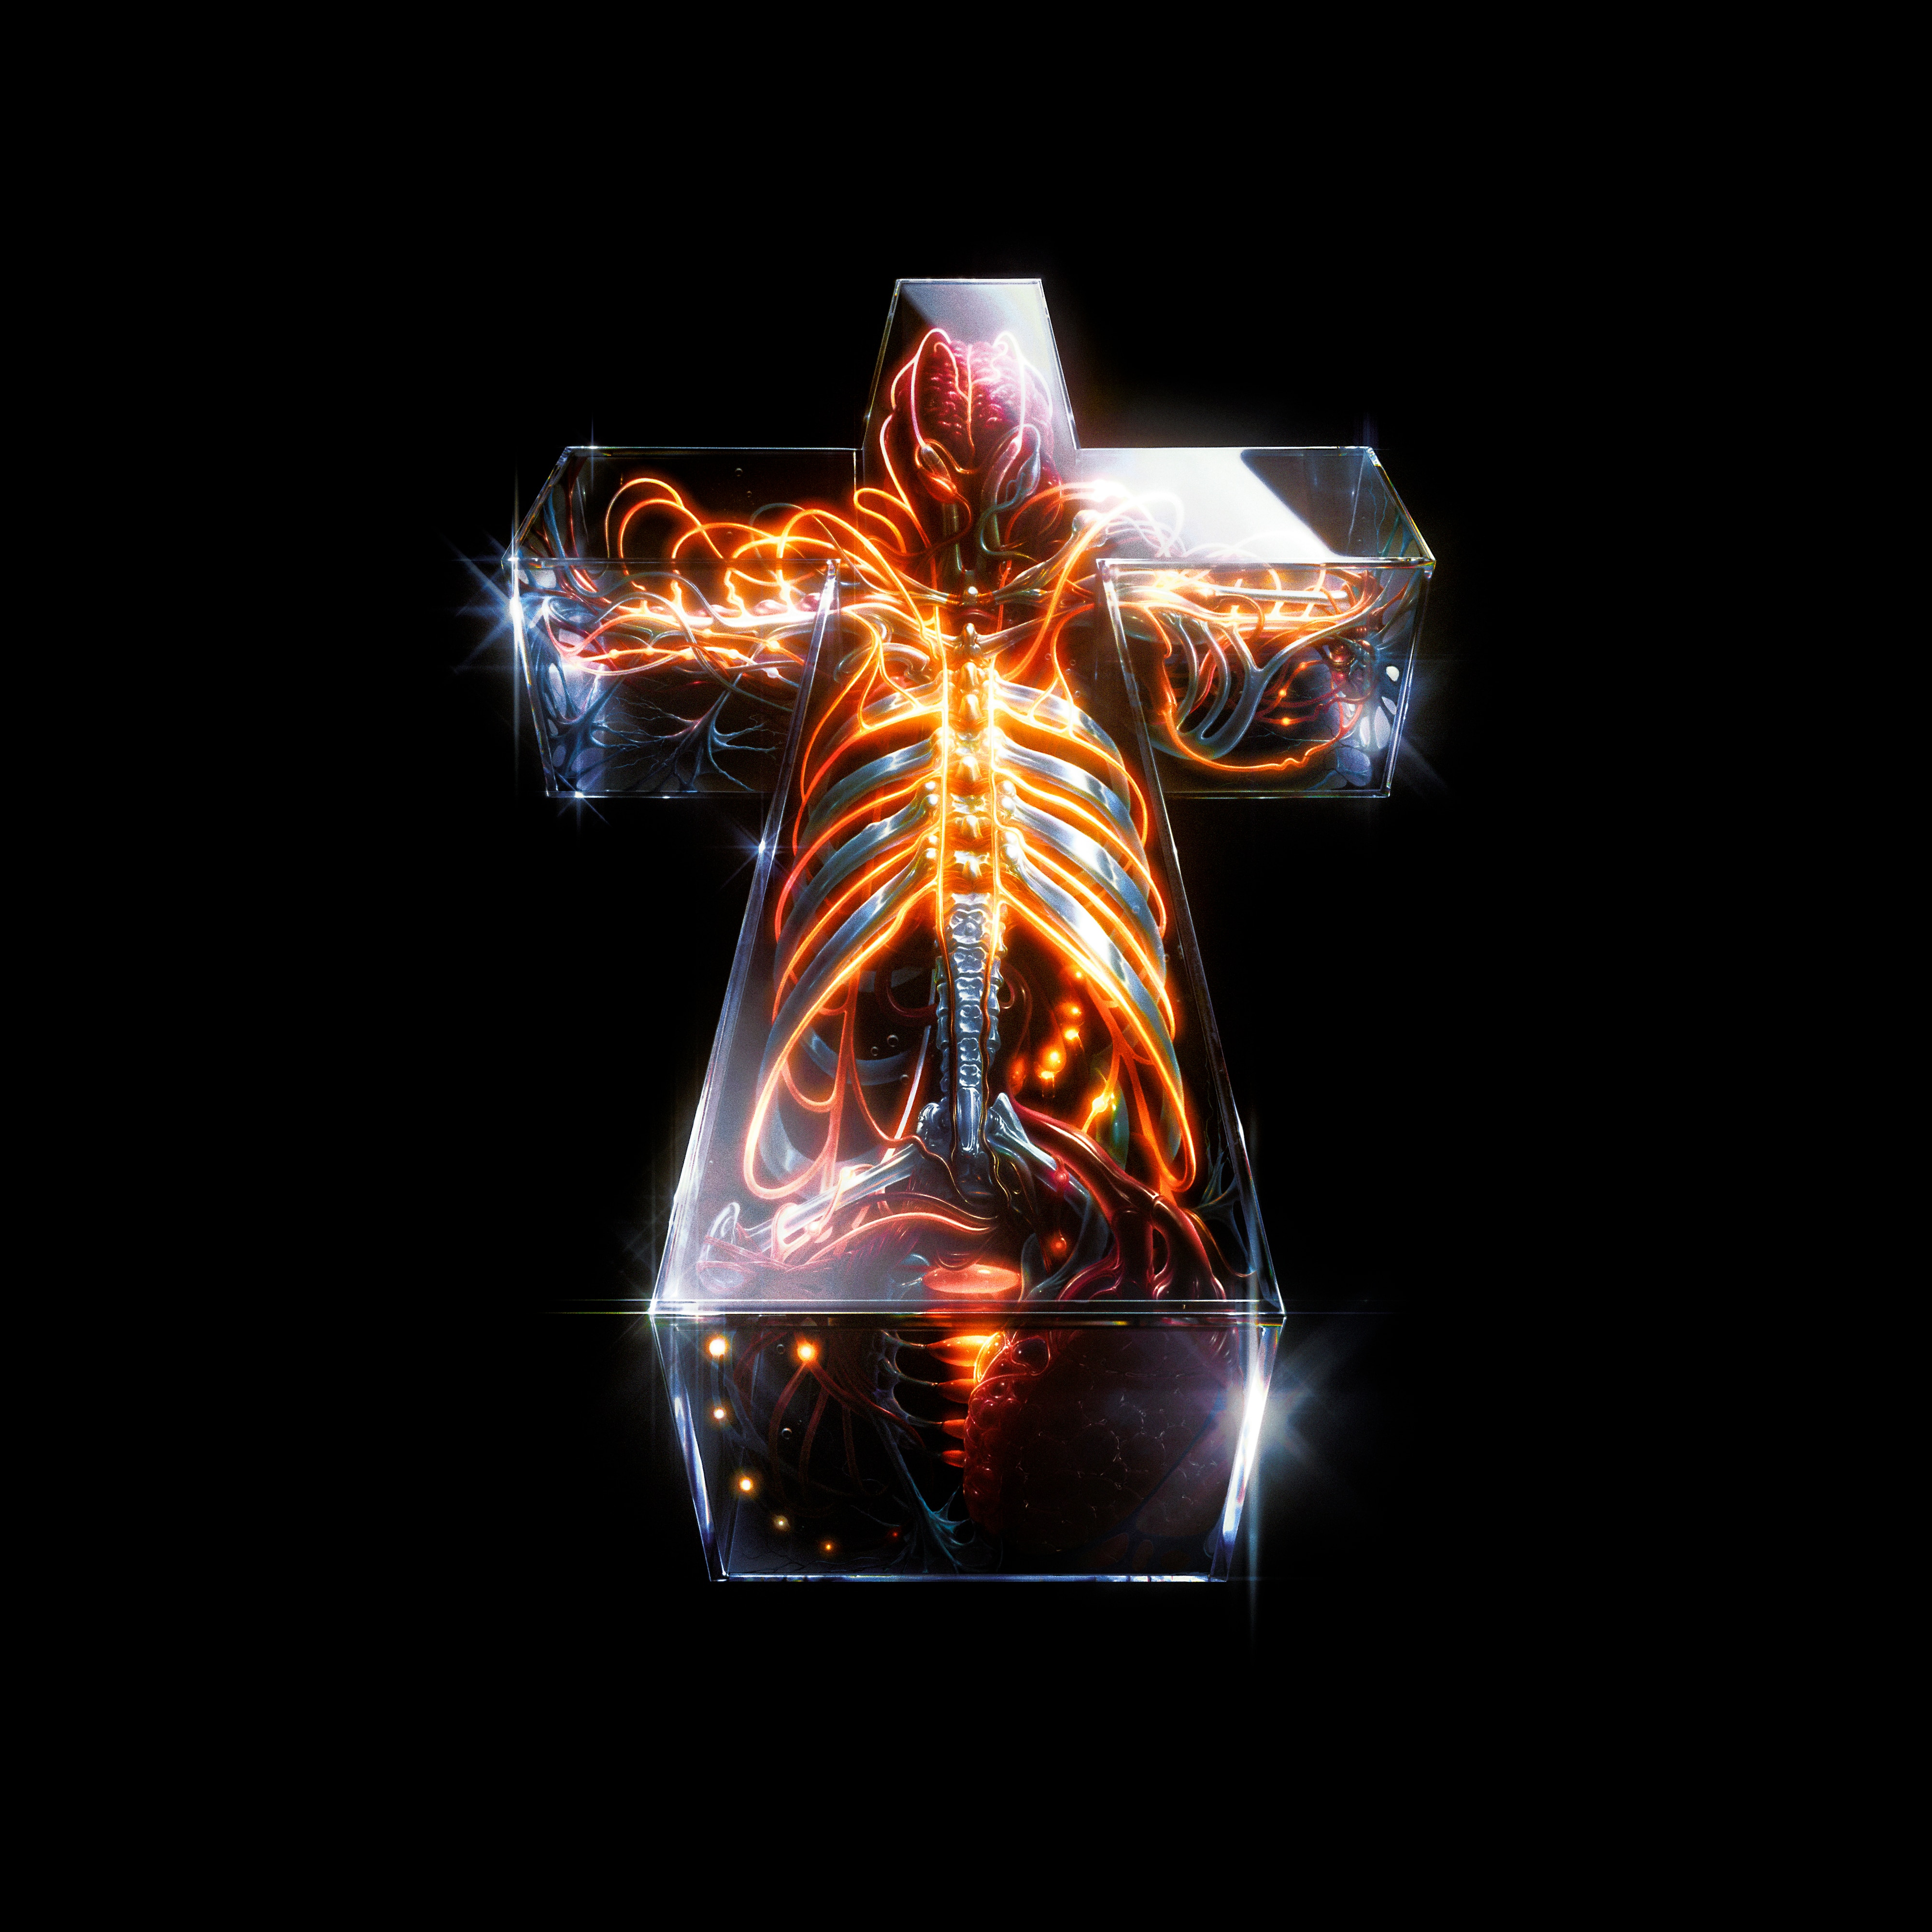 Glass cross with interior of orange nerve paths laced over a metal skeleton with pink brain and bio-organic matter